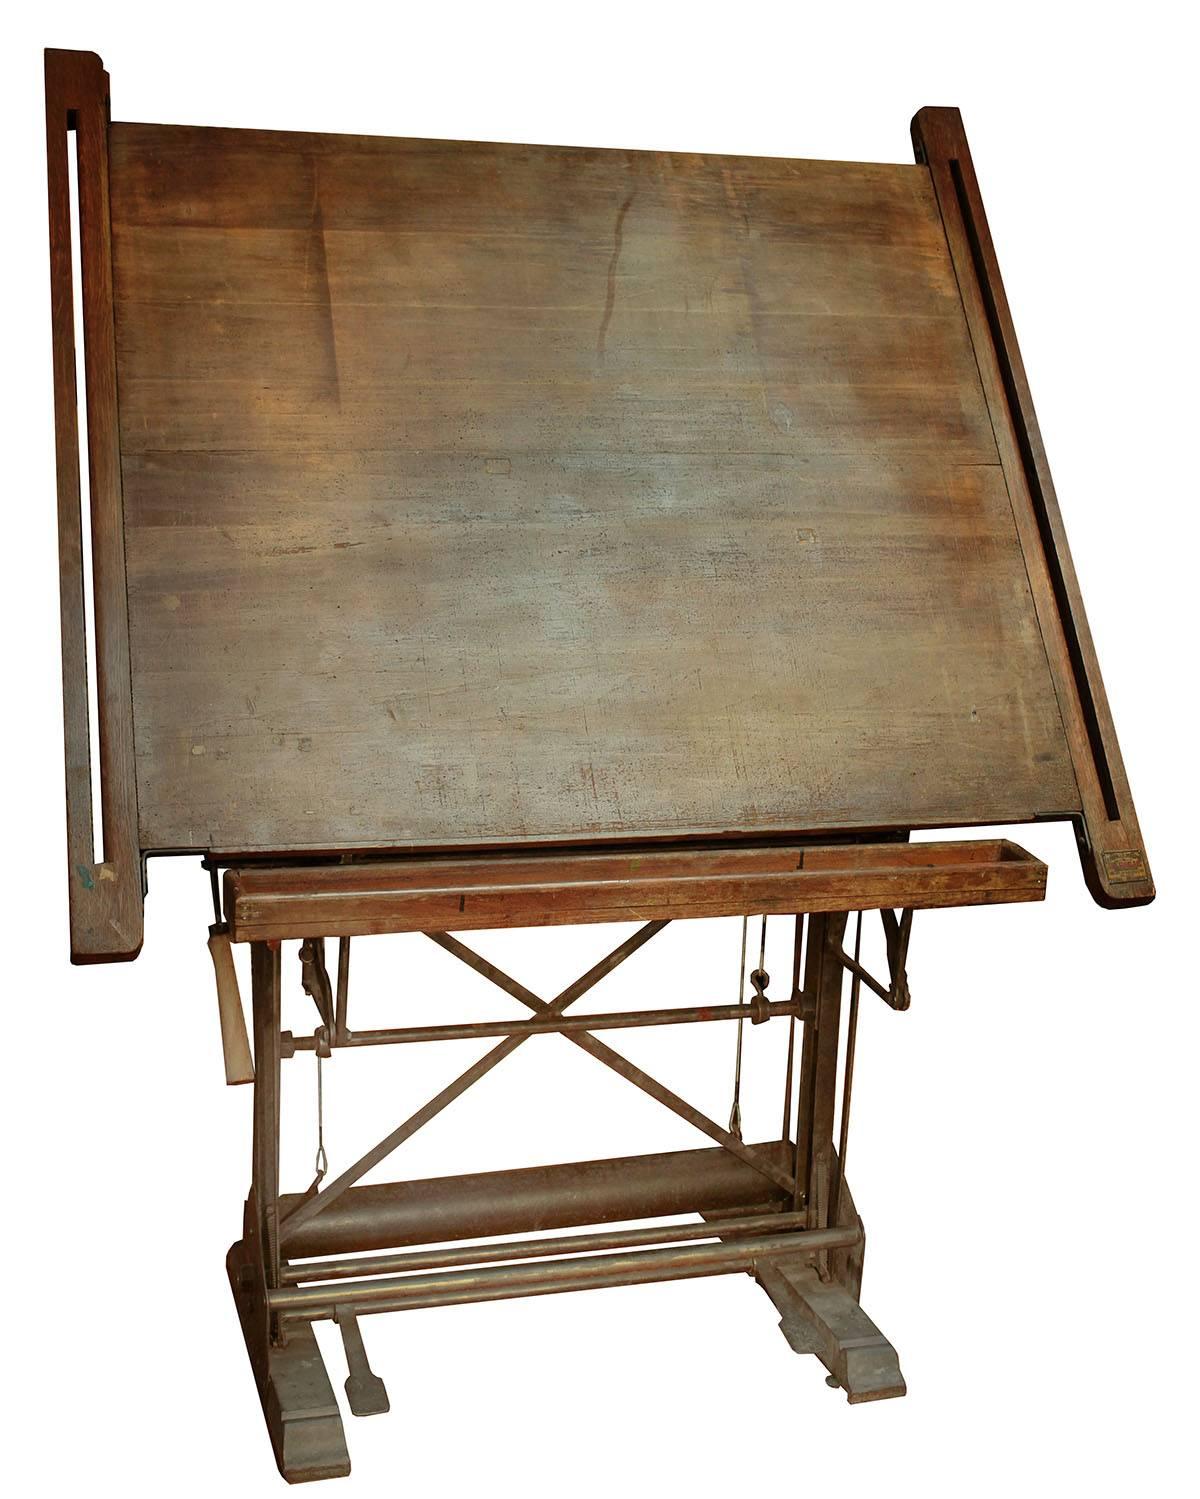 A beautiful piece of function and style. This drafting table dates to the early 20th century and works as well today as the day it was made. Solid cast steel base houses a counter weight that allows the top to move up and with ease. A heavy truly